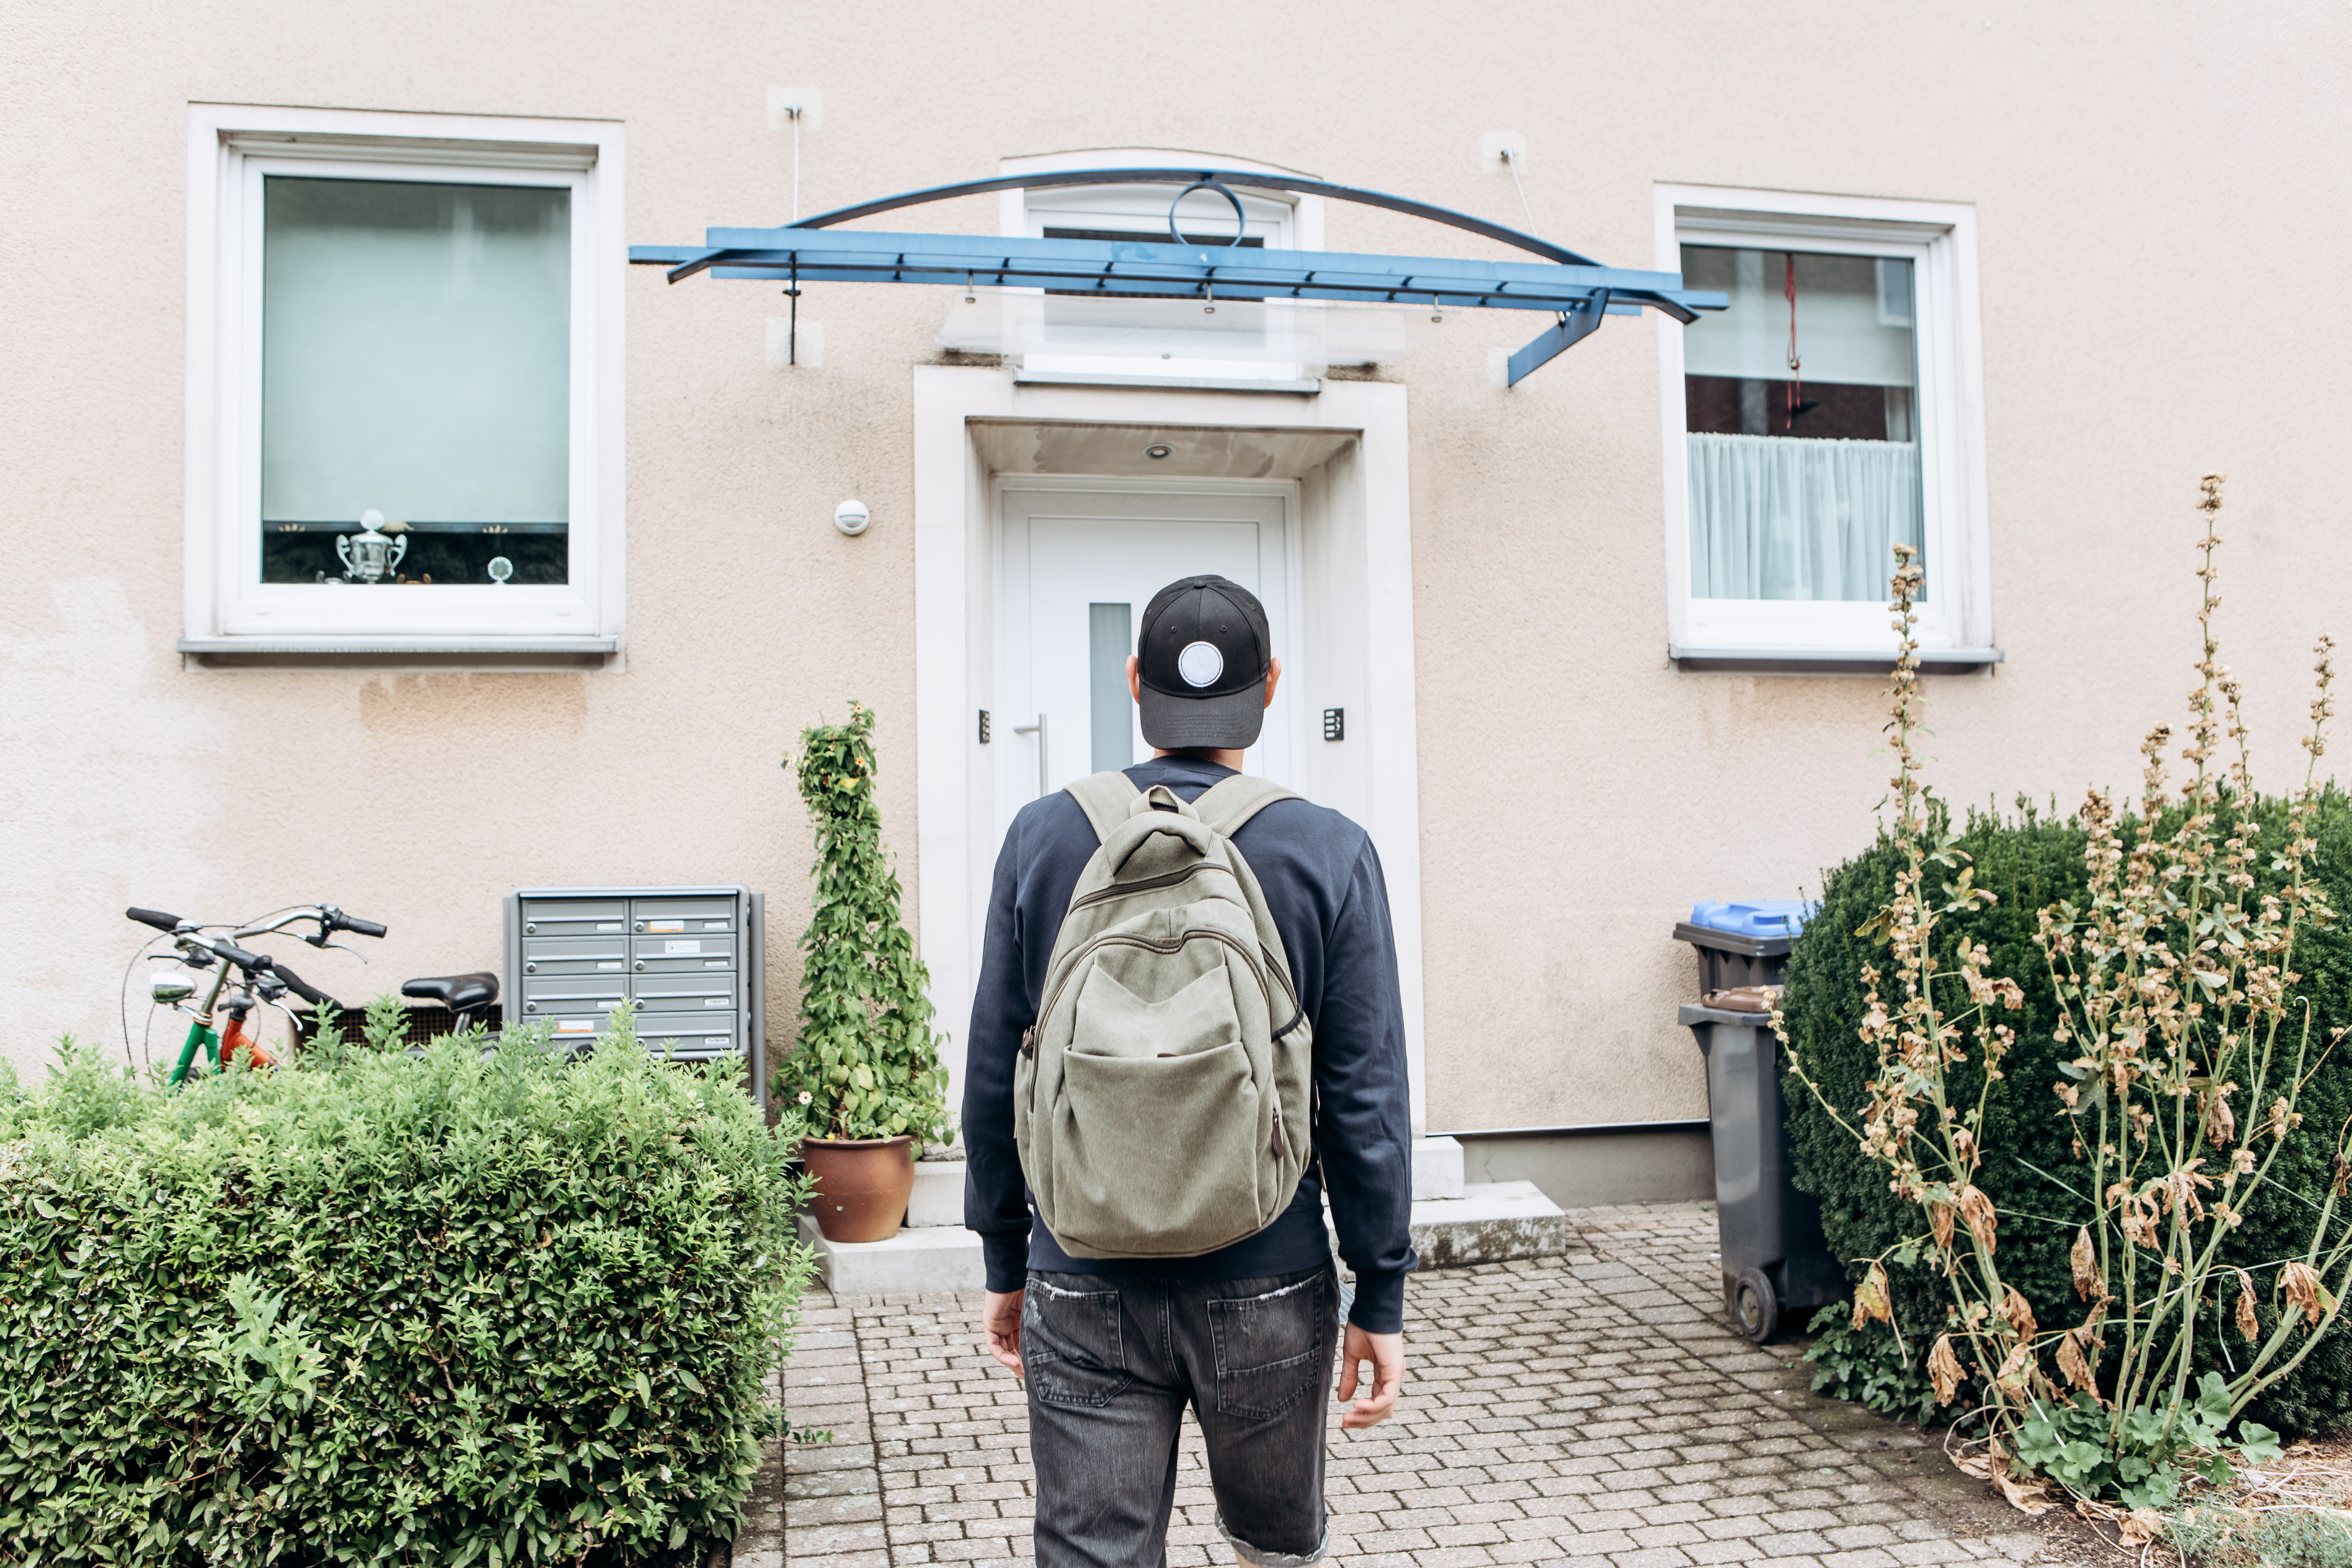 Man wearing a backpack and standing in front of a house